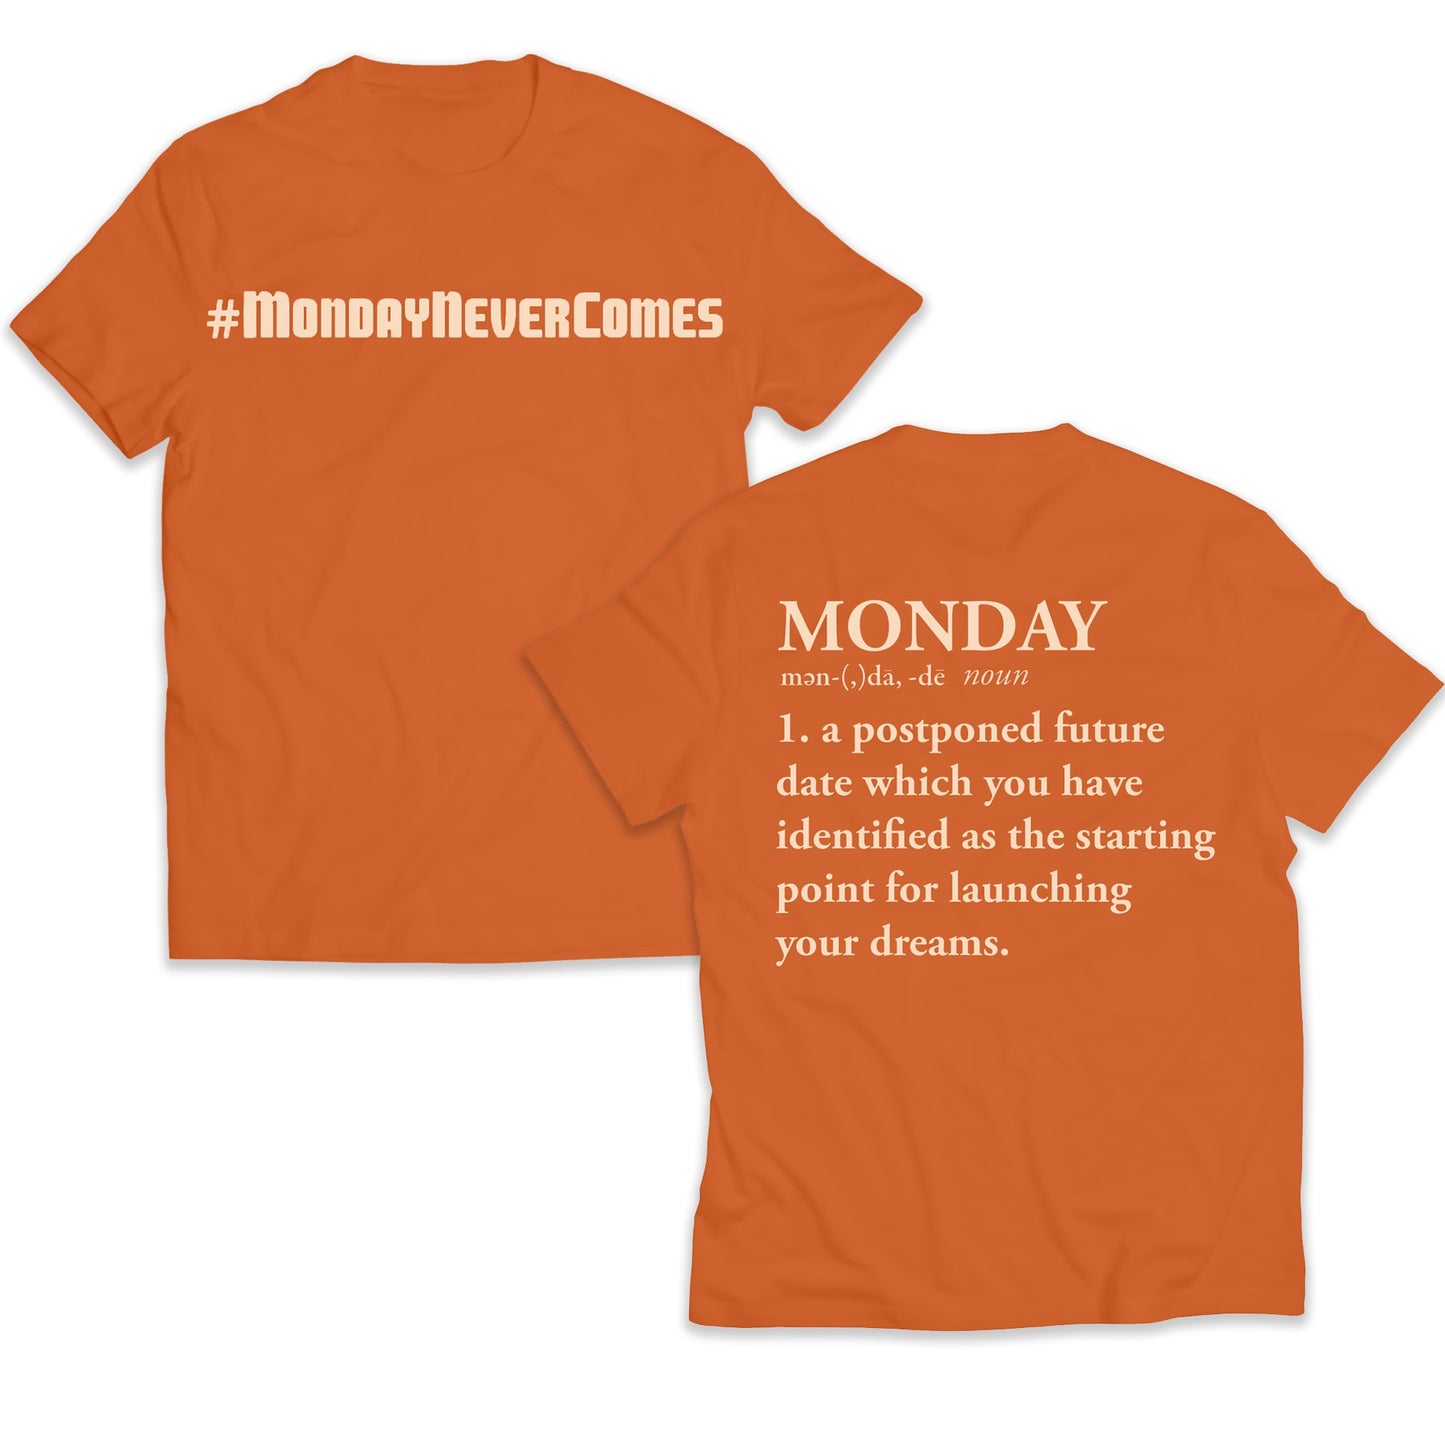 Monday Never Comes Inspired Shirt